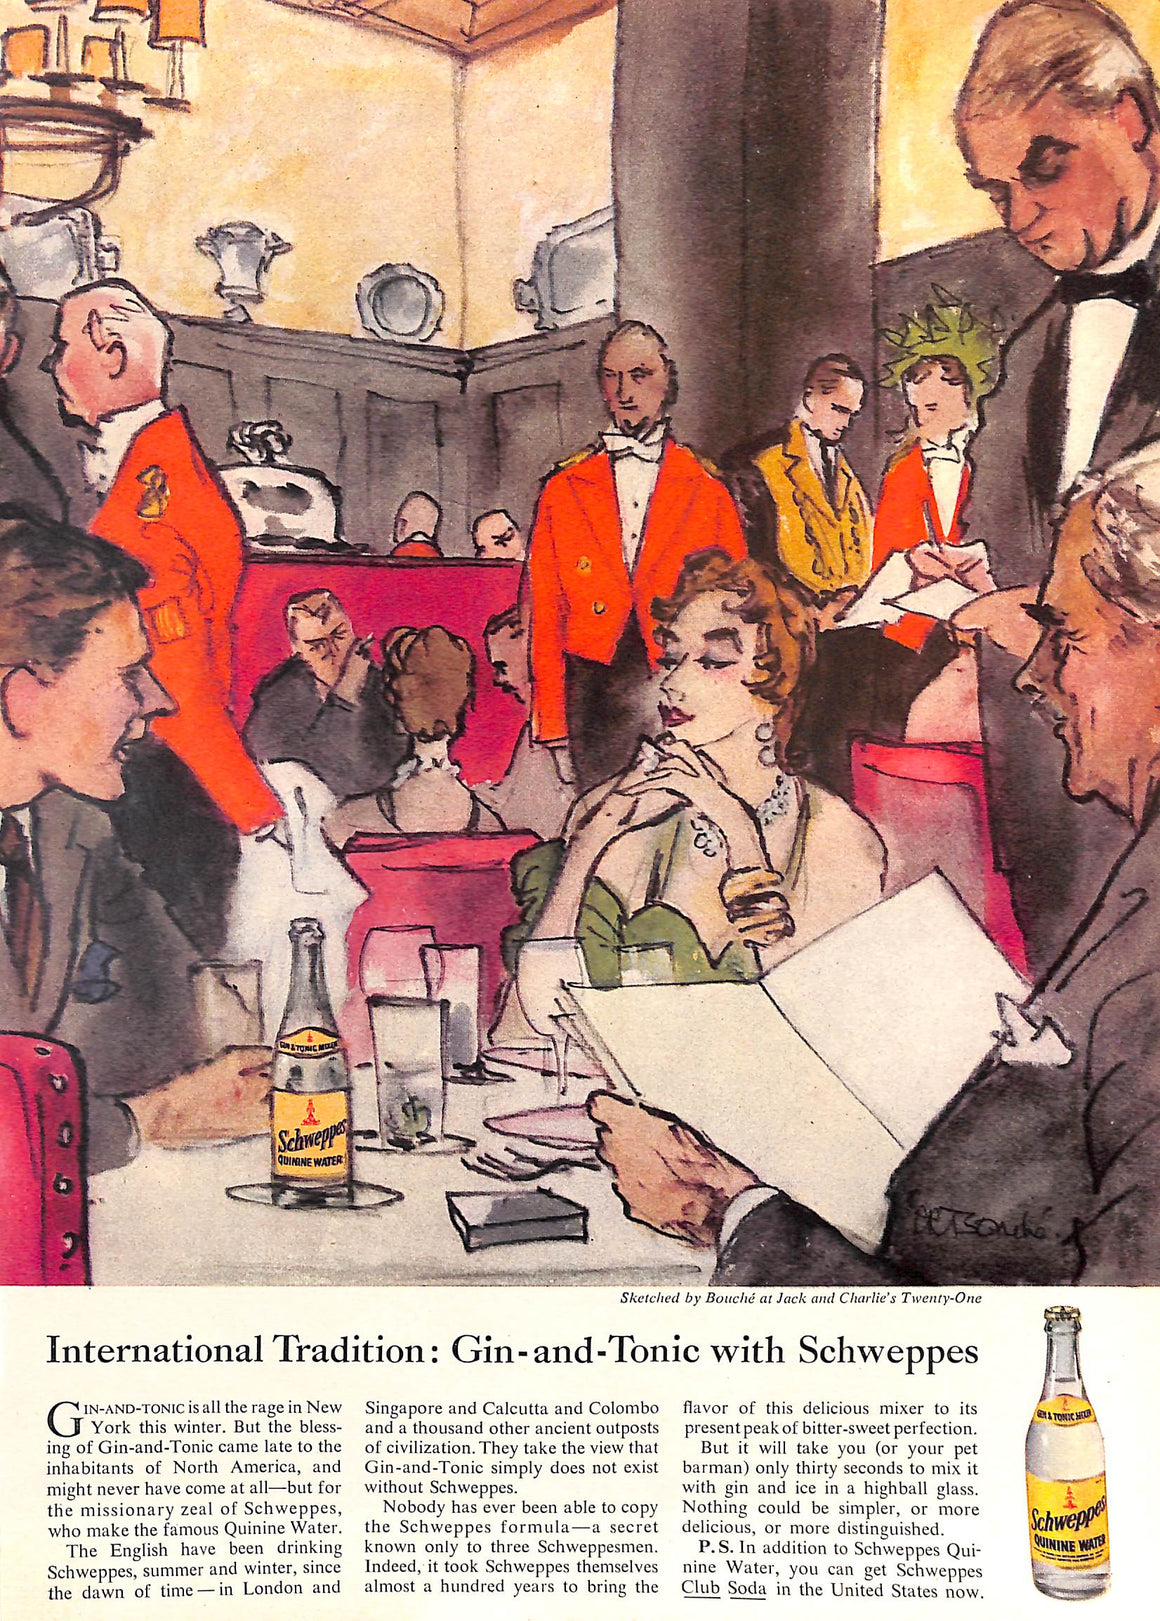 "Gin-And-Tonic With Schweppes Sketched by Rene Bouche At Jack And Charlie's Twenty-One" Advert Page